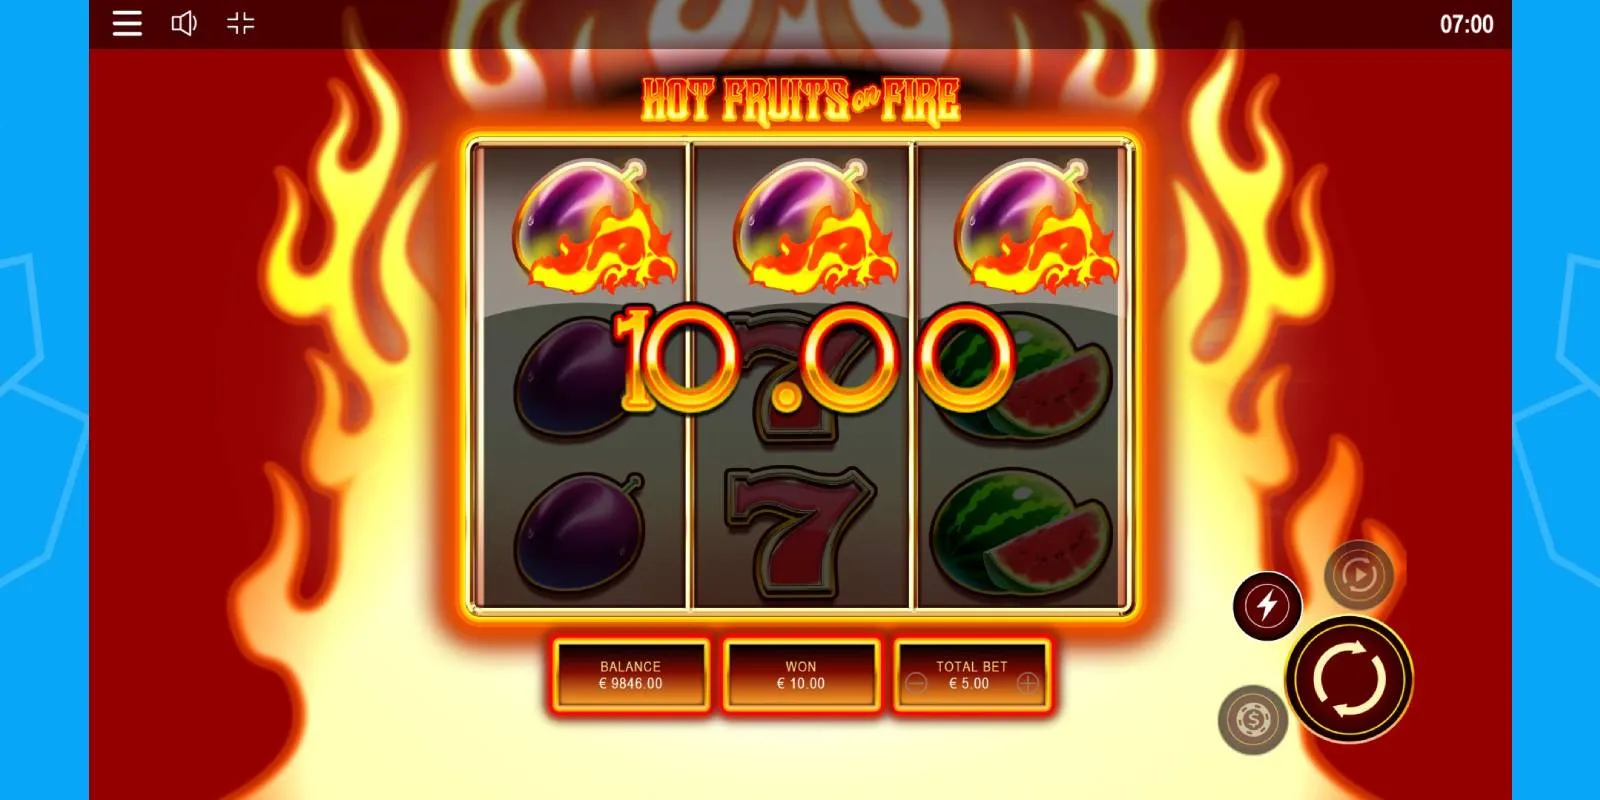 Play Hot Fruits on Fire online pokies